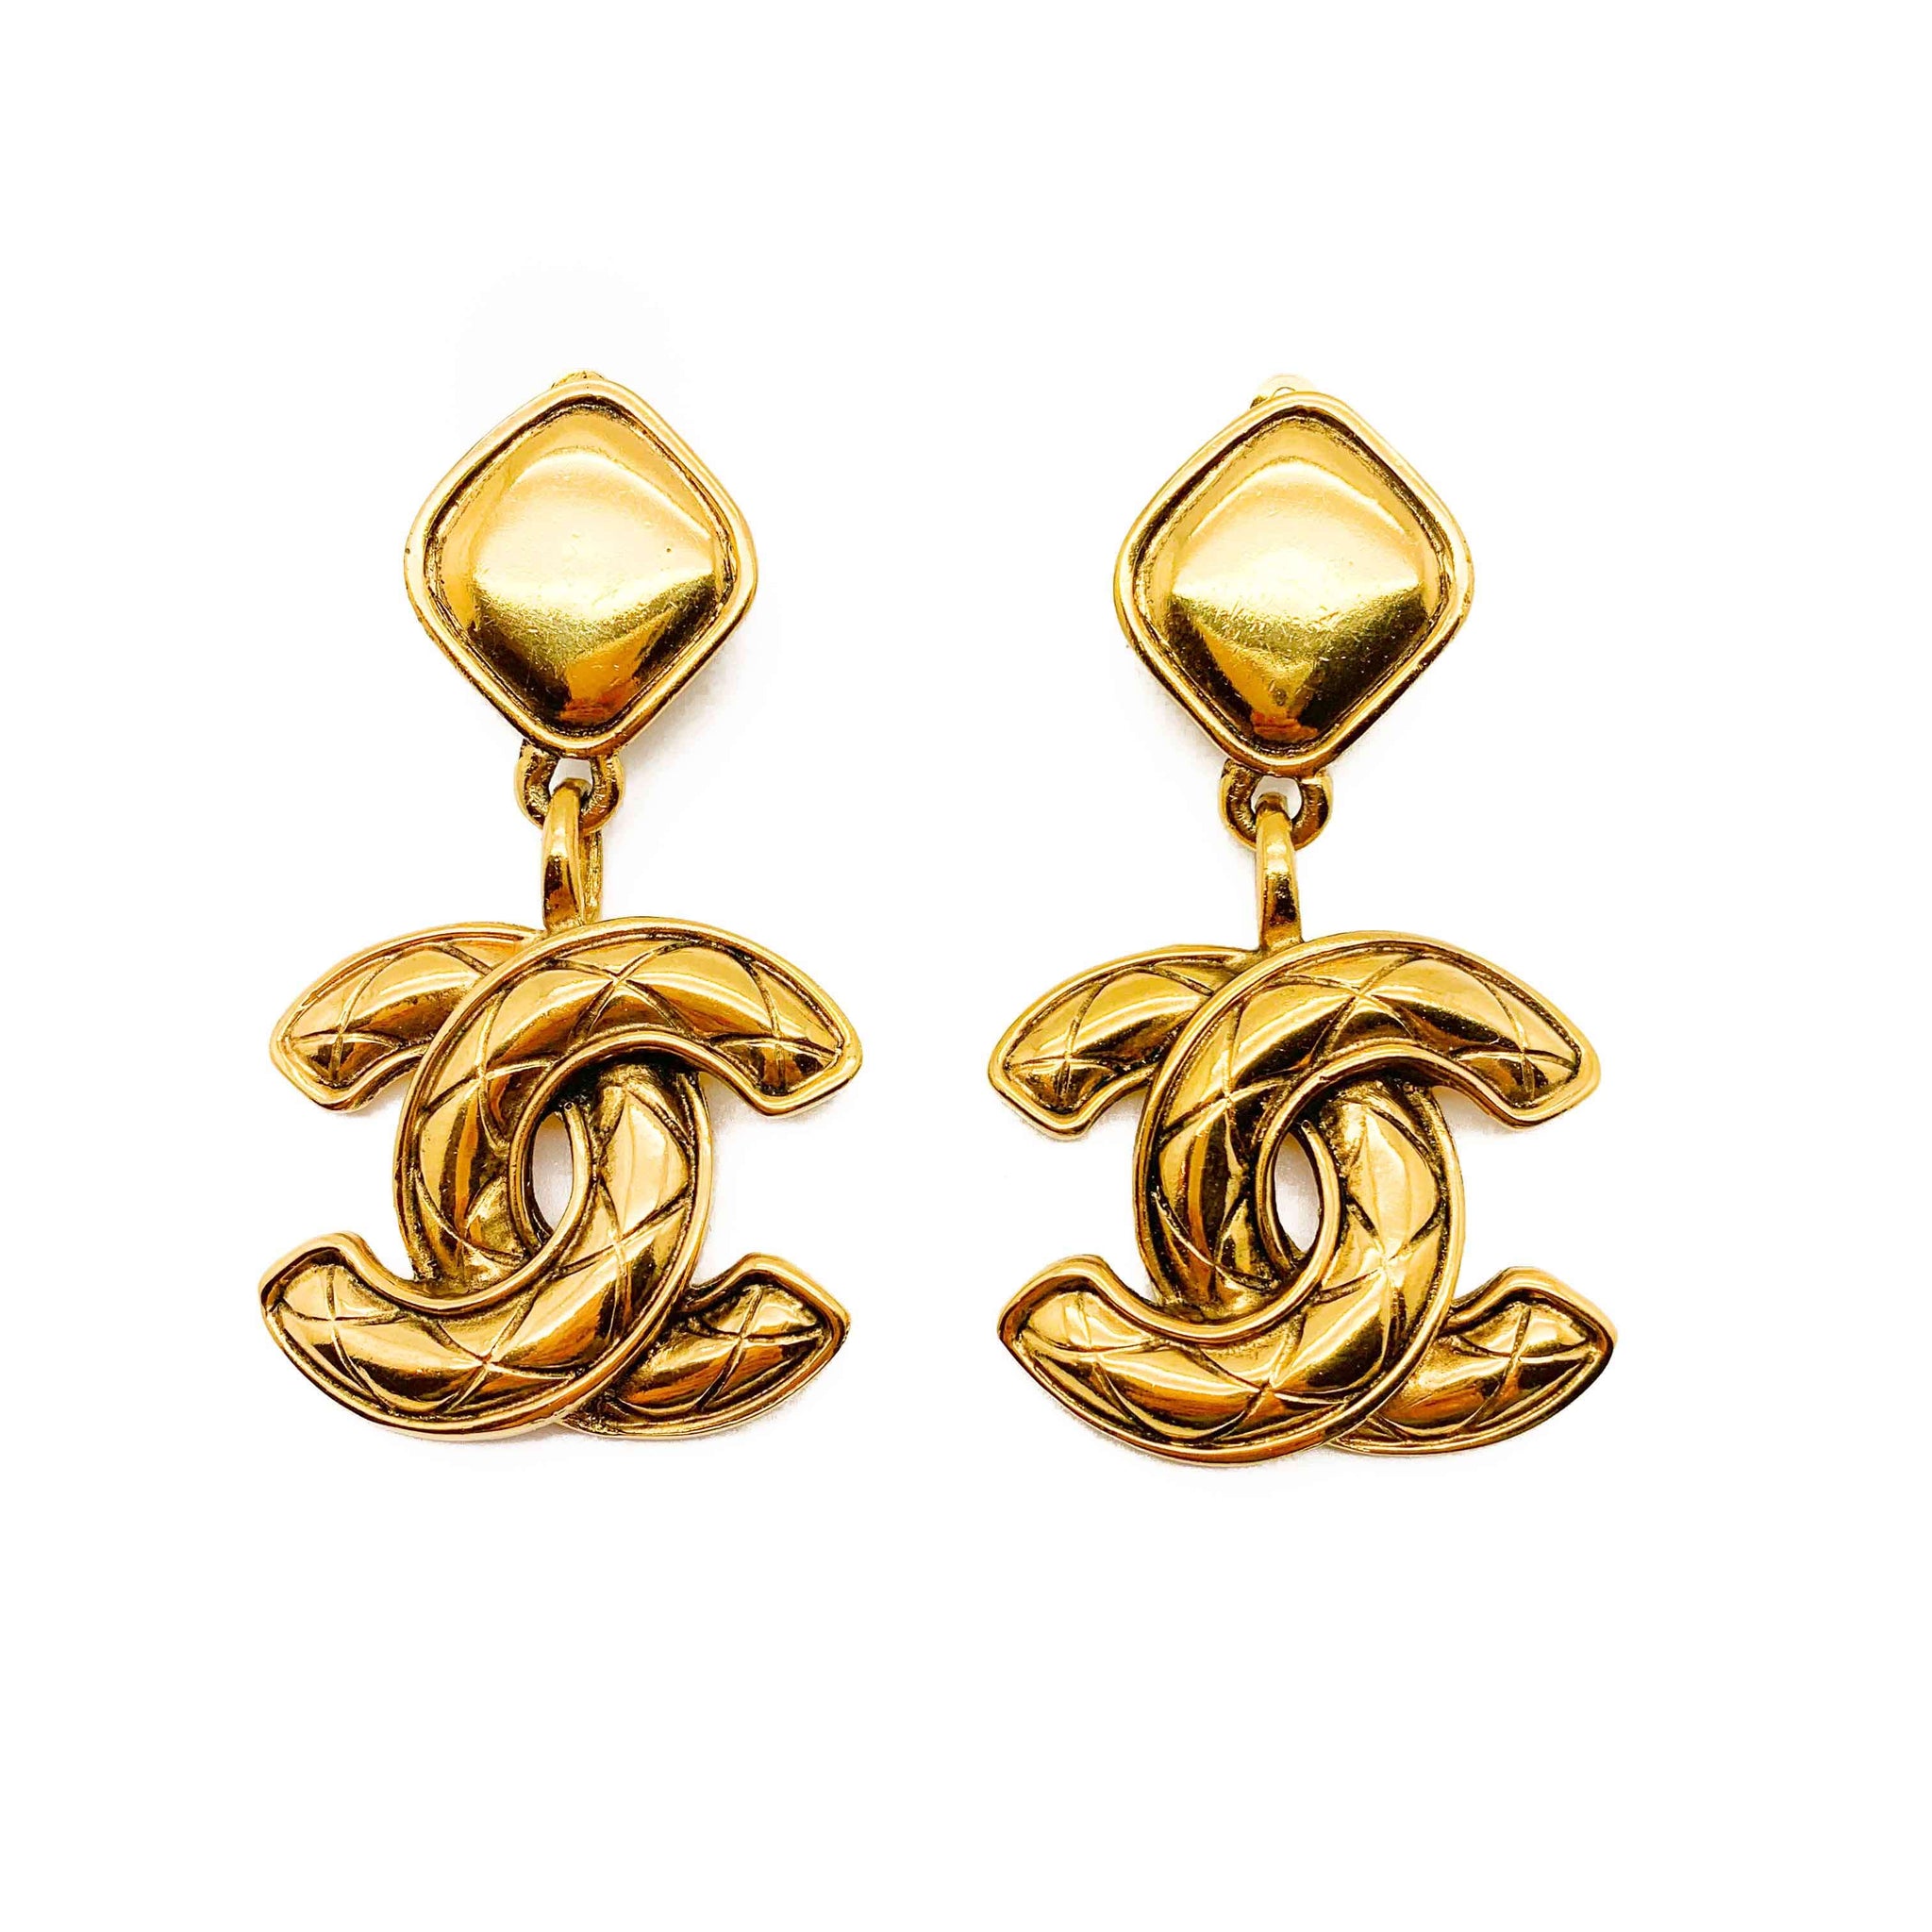 Vintage Chanel Jewelry for Sale